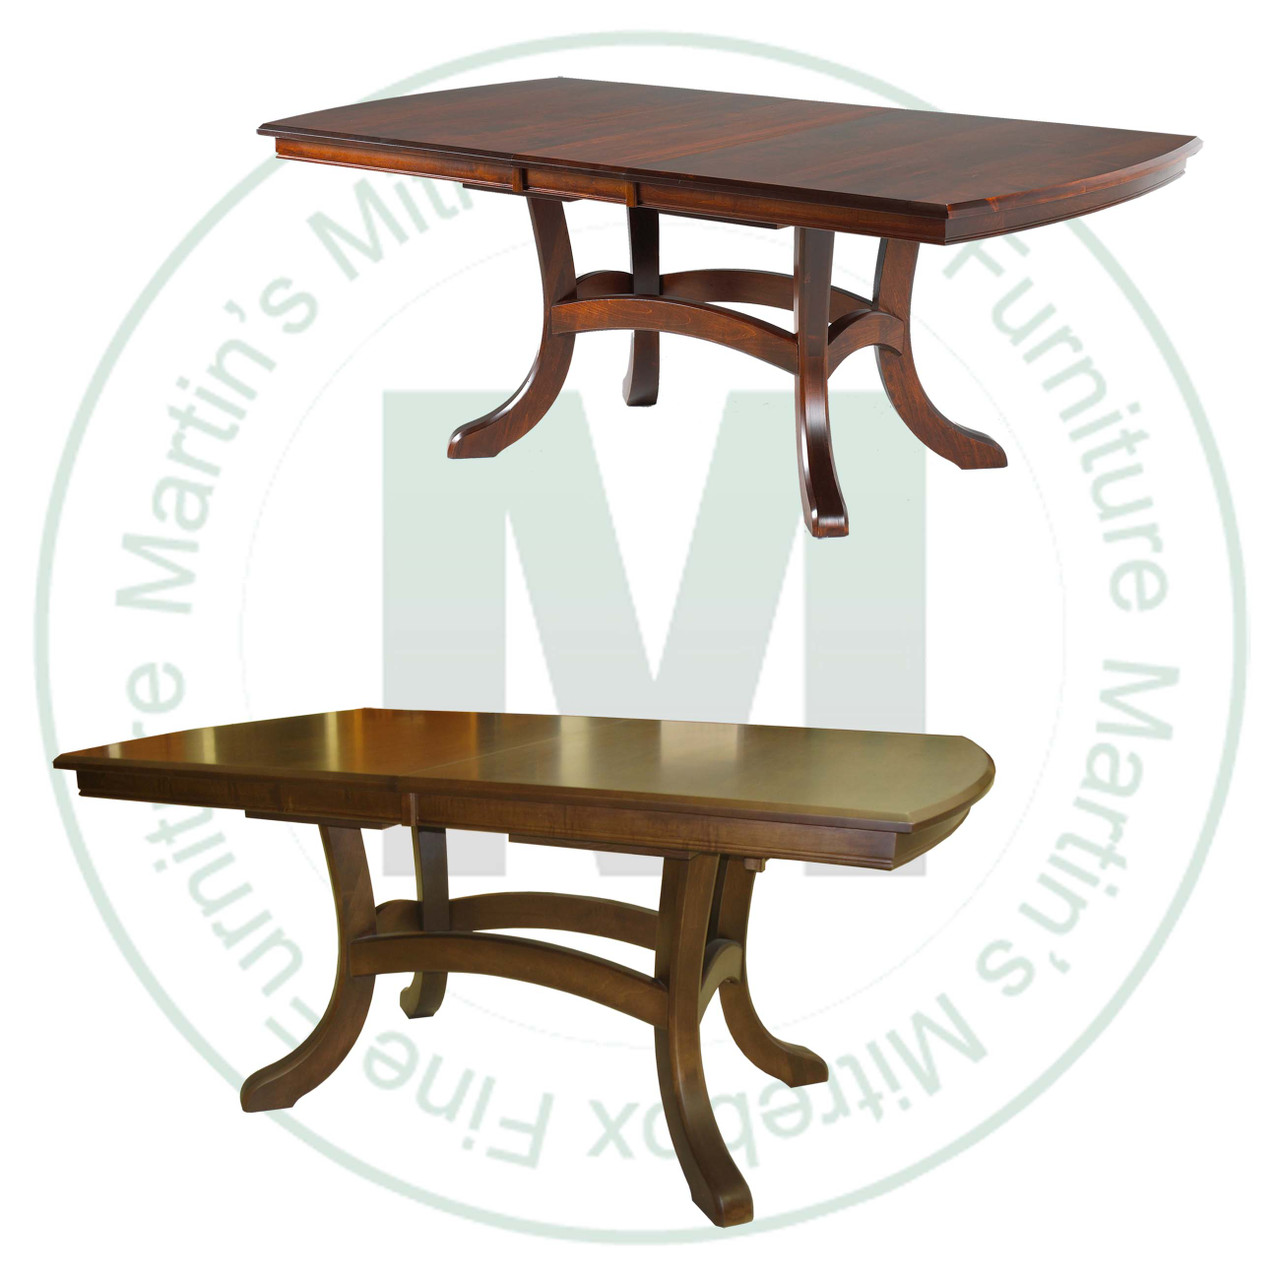 Maple Jordan Double Pedestal Table 54''D x 84''W x 30''H With 3 - 12'' Leaves. Table Has 1.25'' Thick Top